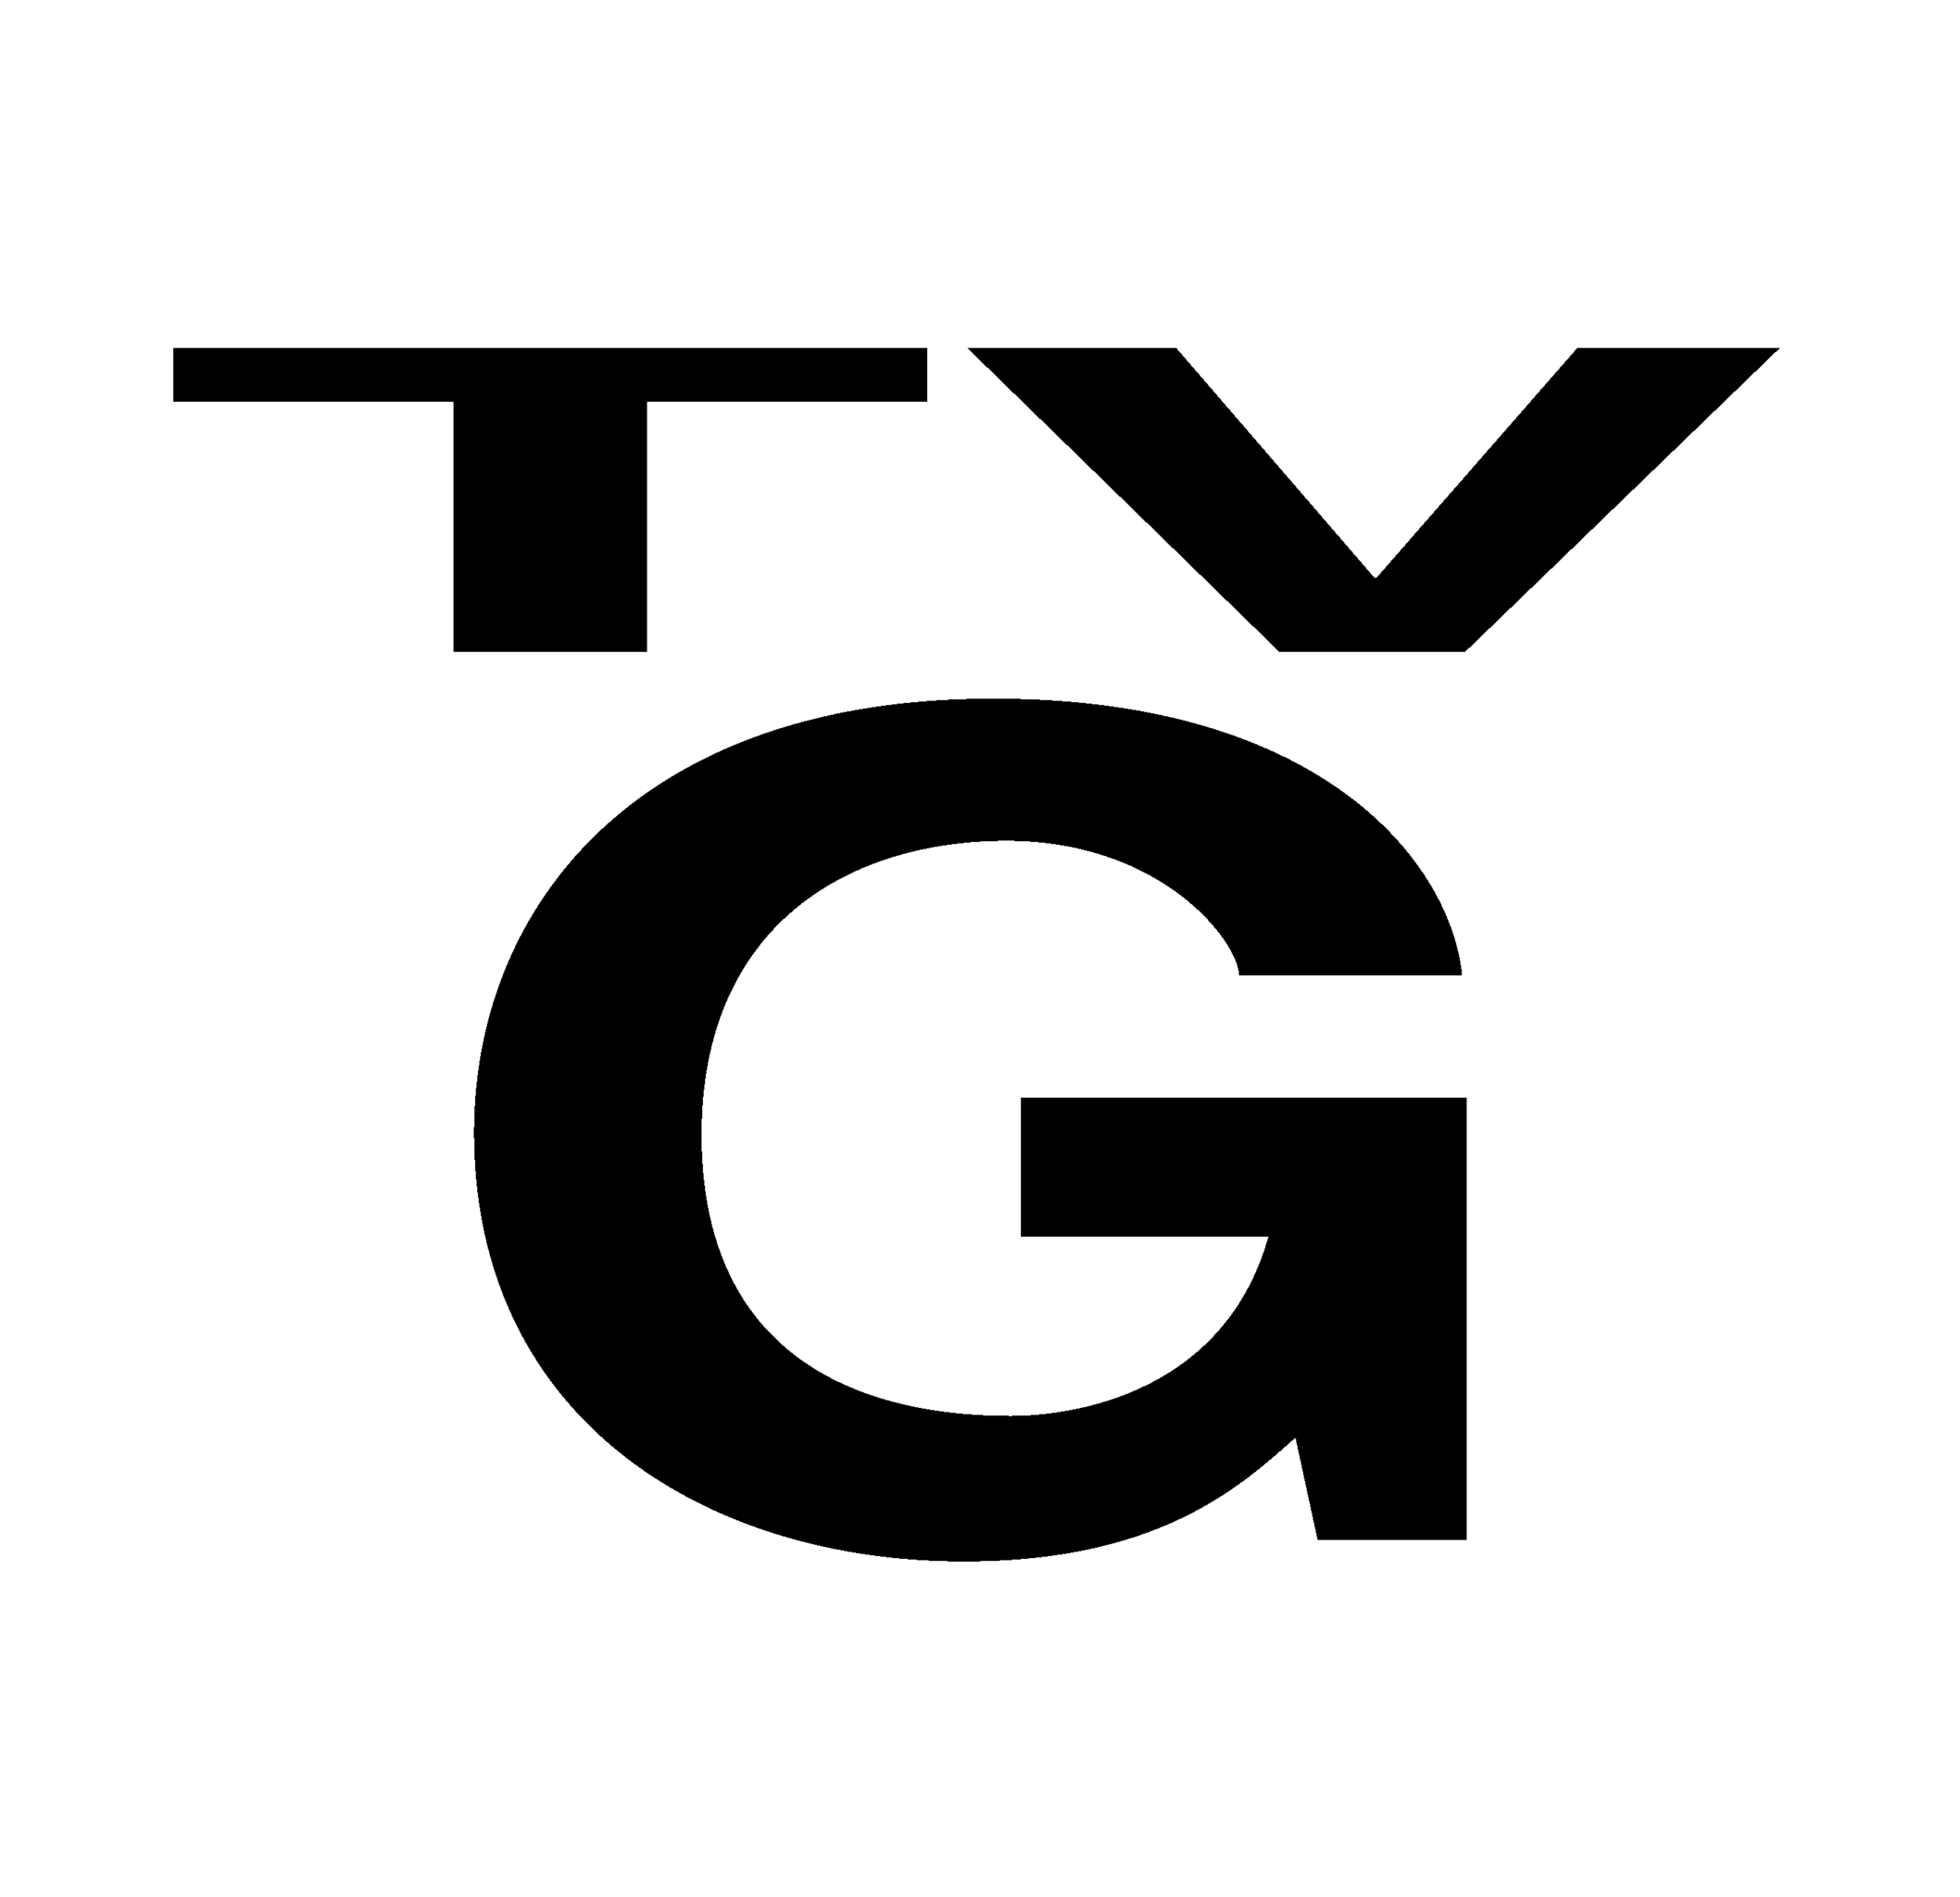 File:White TV-14-LV icon.png - Wikimedia Commons